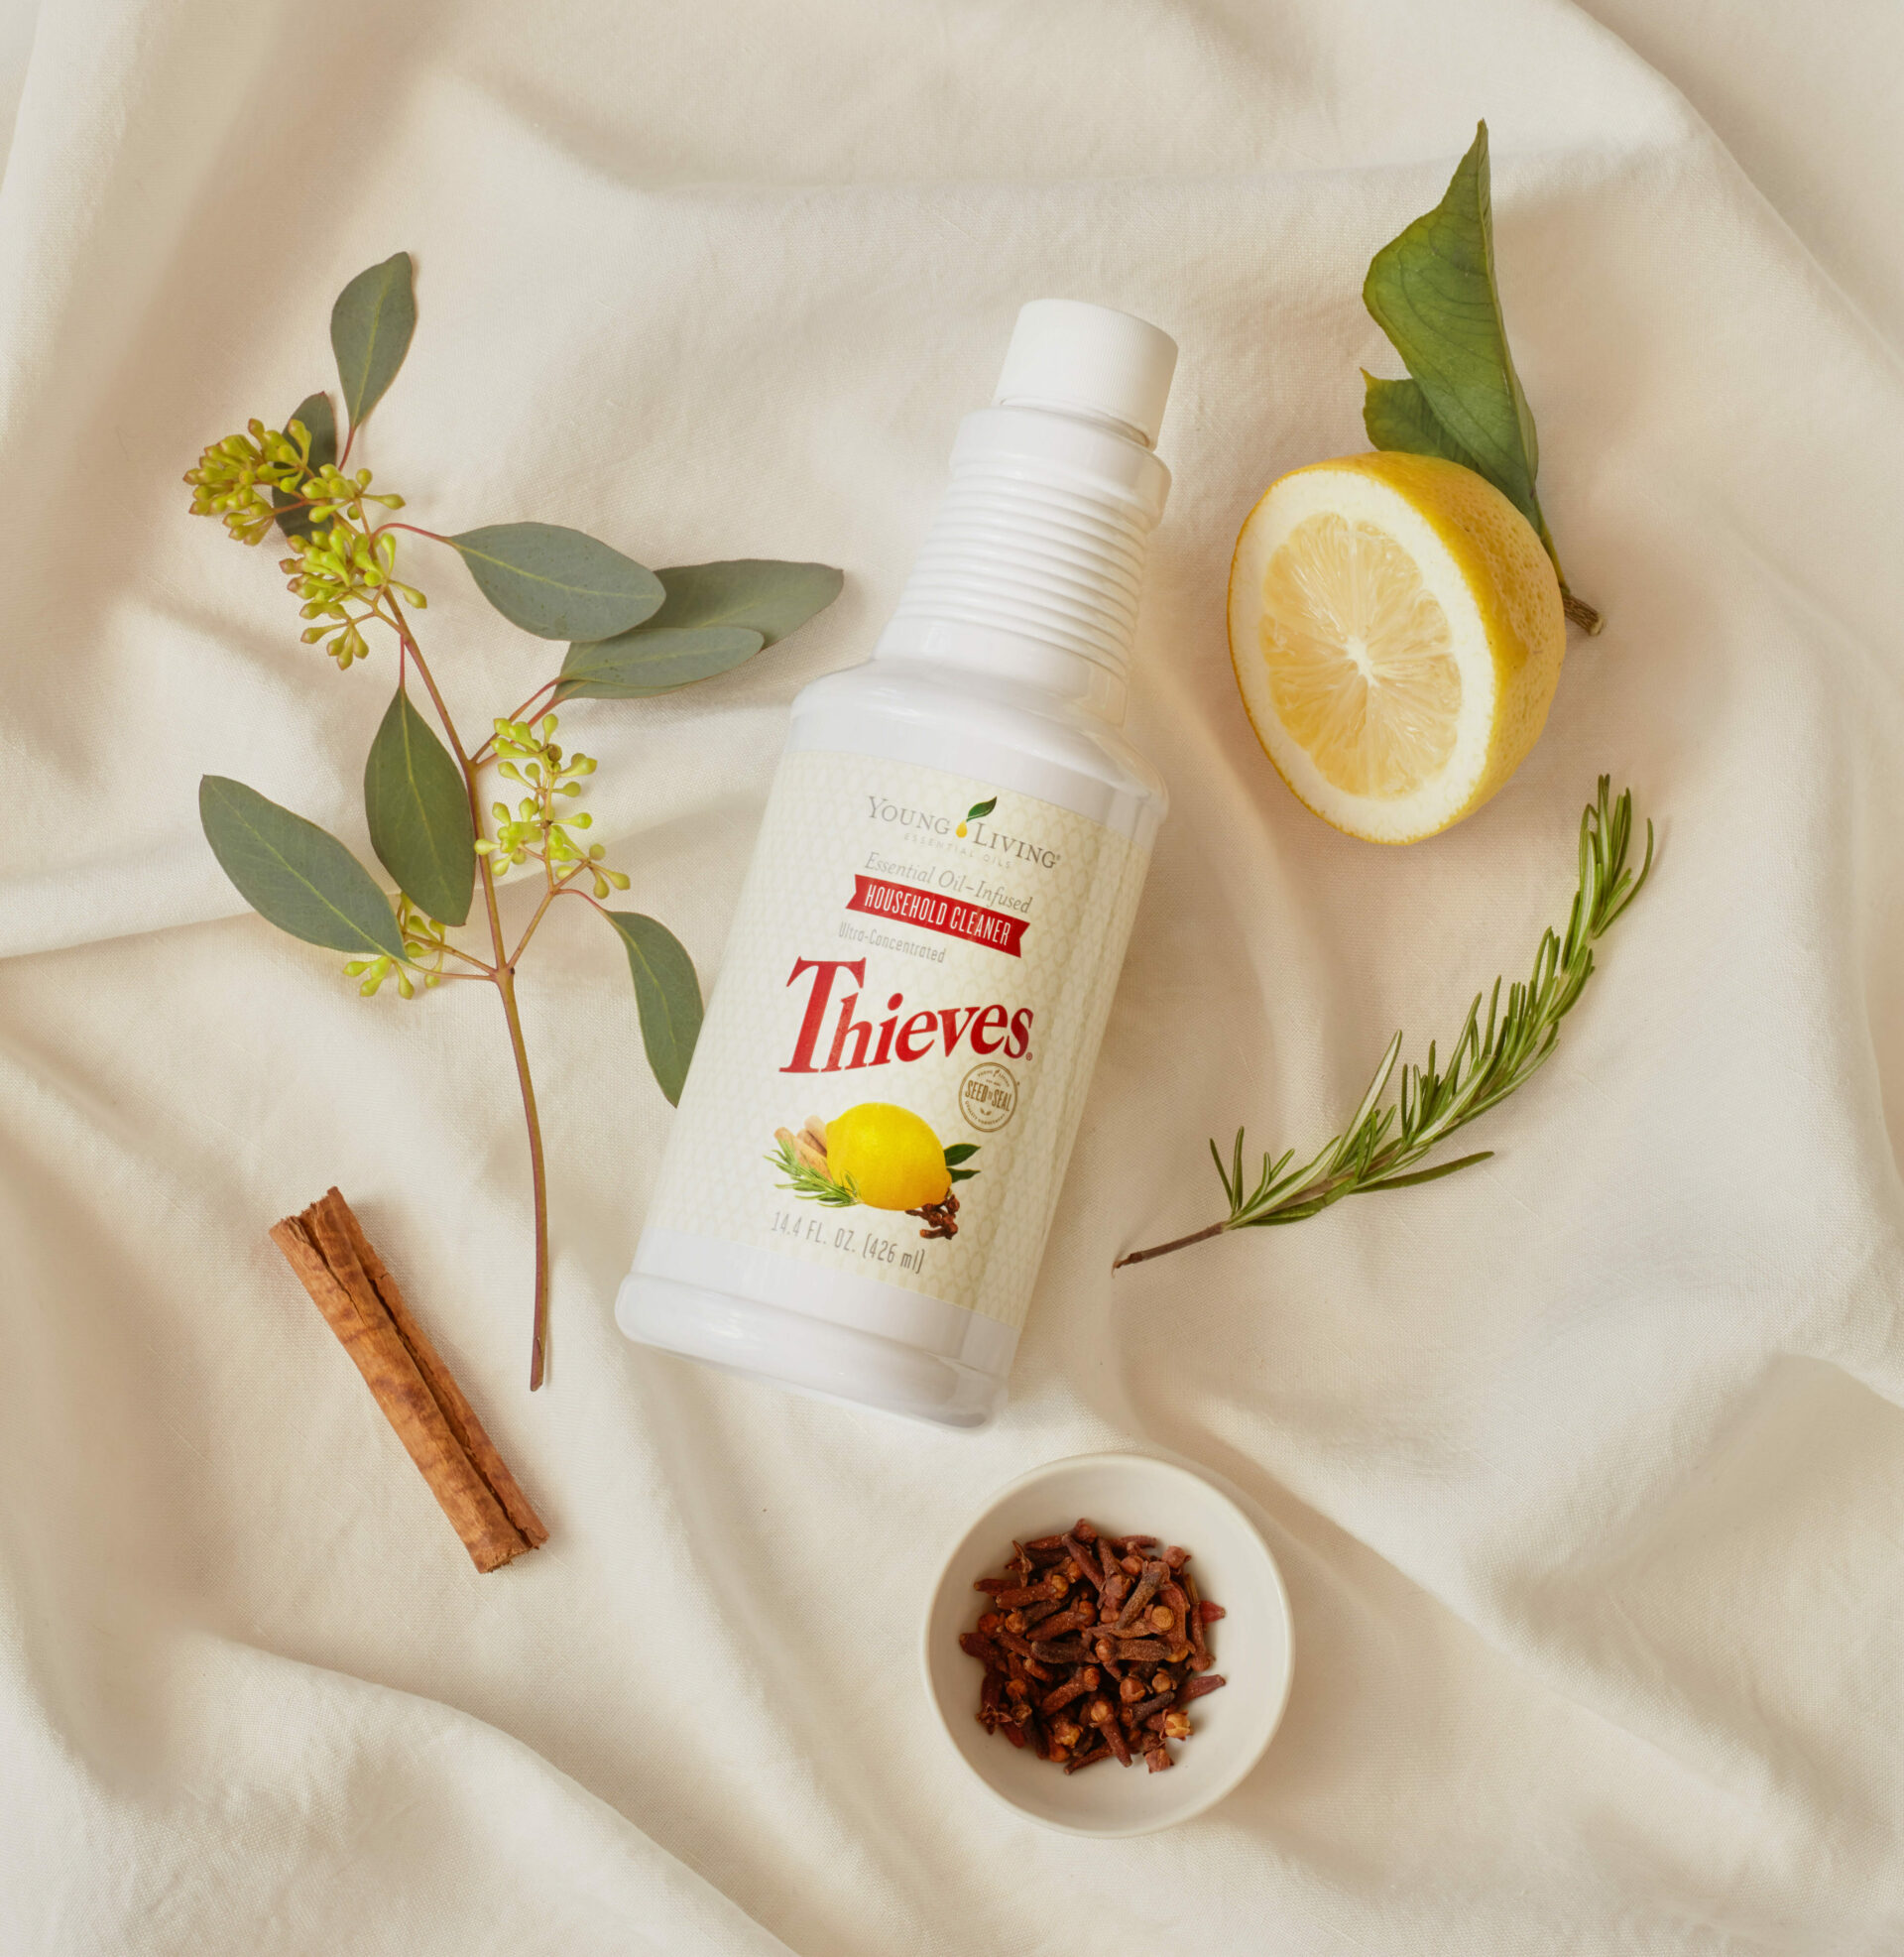 Thieves Household Cleaner sitting on a linen cloth next to botanicals, a lemon, cloves, and a cinnamon stick - Young Living Lavender Life Blog 